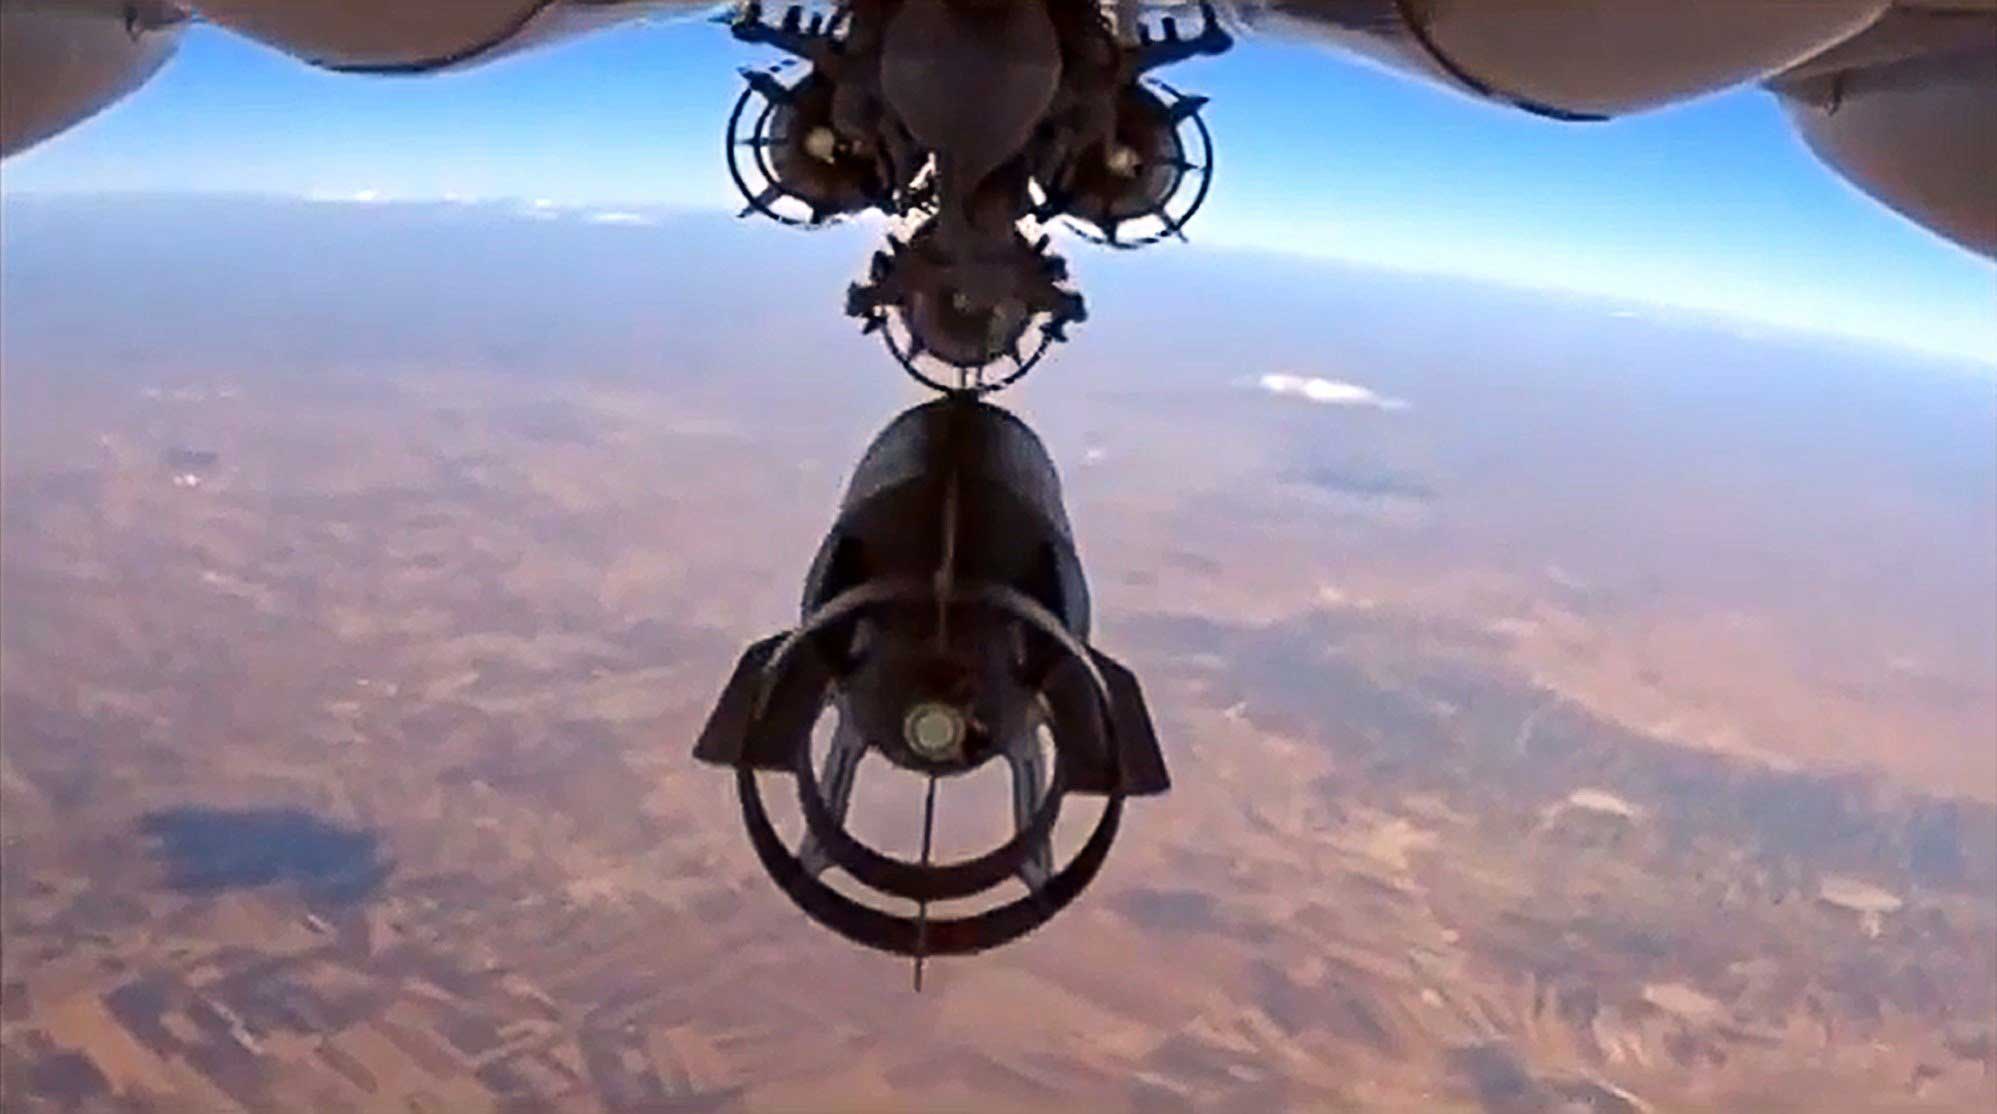 A video grab made on Oct. 6, 2015, shows an image taken from footage made available on the Russian Defense Ministry's official website on Oct. 5, purporting to show a Russia's Su-24M bomber dropping bombs during an airstrike in Syria. (Russian Defence Ministry/AFP/Getty Images)